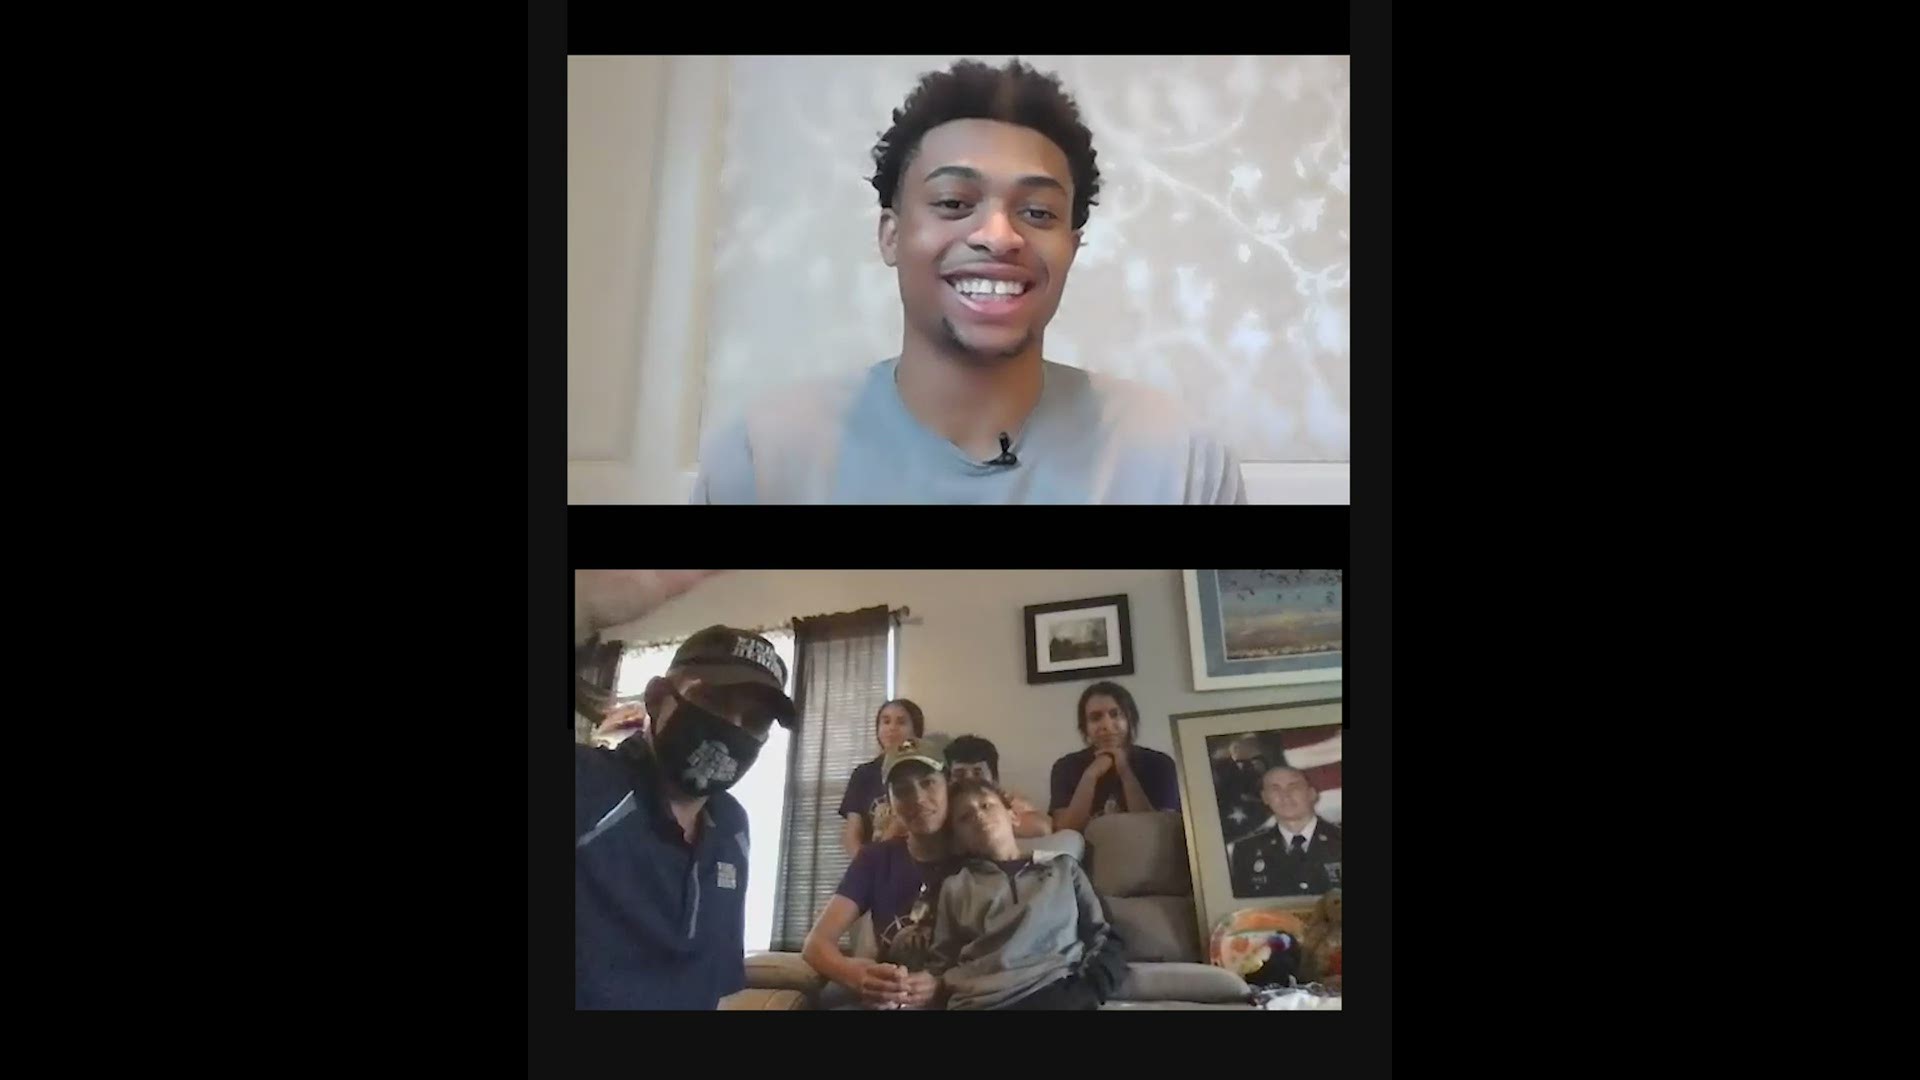 Spurs player Keldon Johnson surprised the Watson family during a video session with the news of a $10,000 gift. Credit: Spurs Sports & Entertainment